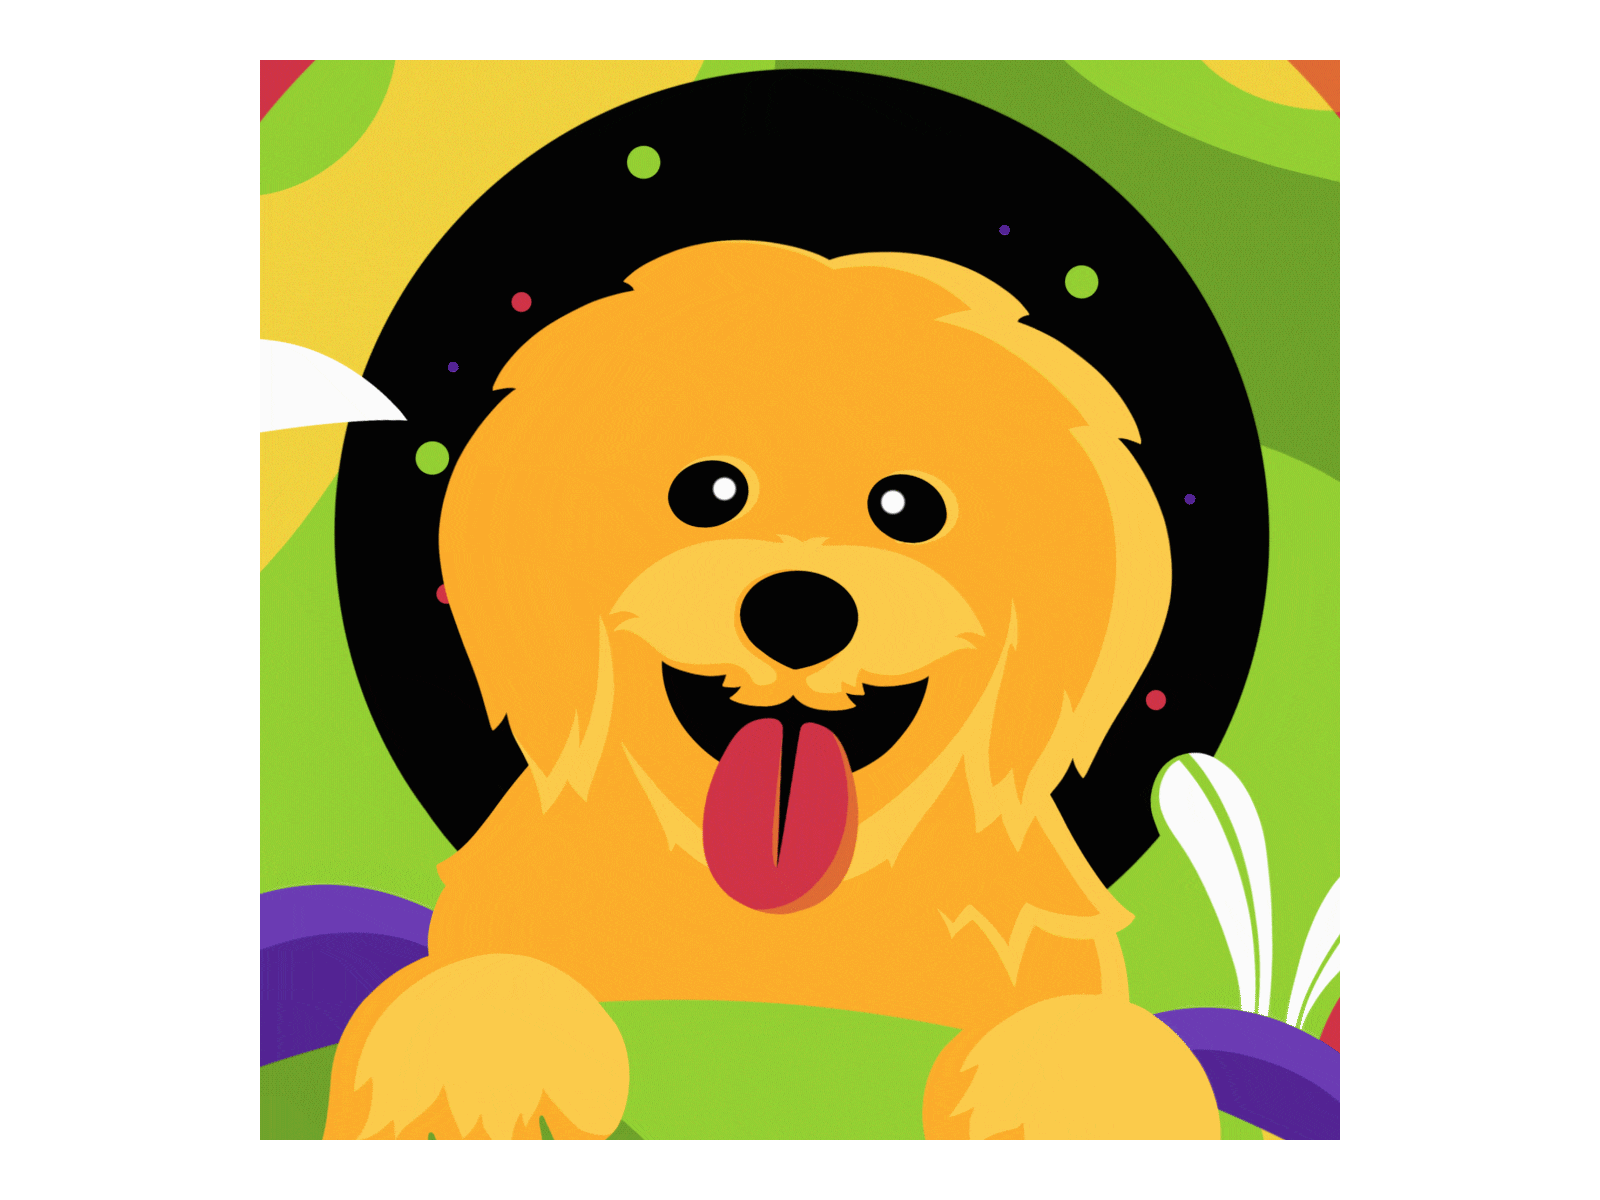 Puppy Animation 2d animation after effects animated gif animation cartoon illustration design digital dog animation dog illustration illustration illustrator procreate puppy puppy animation